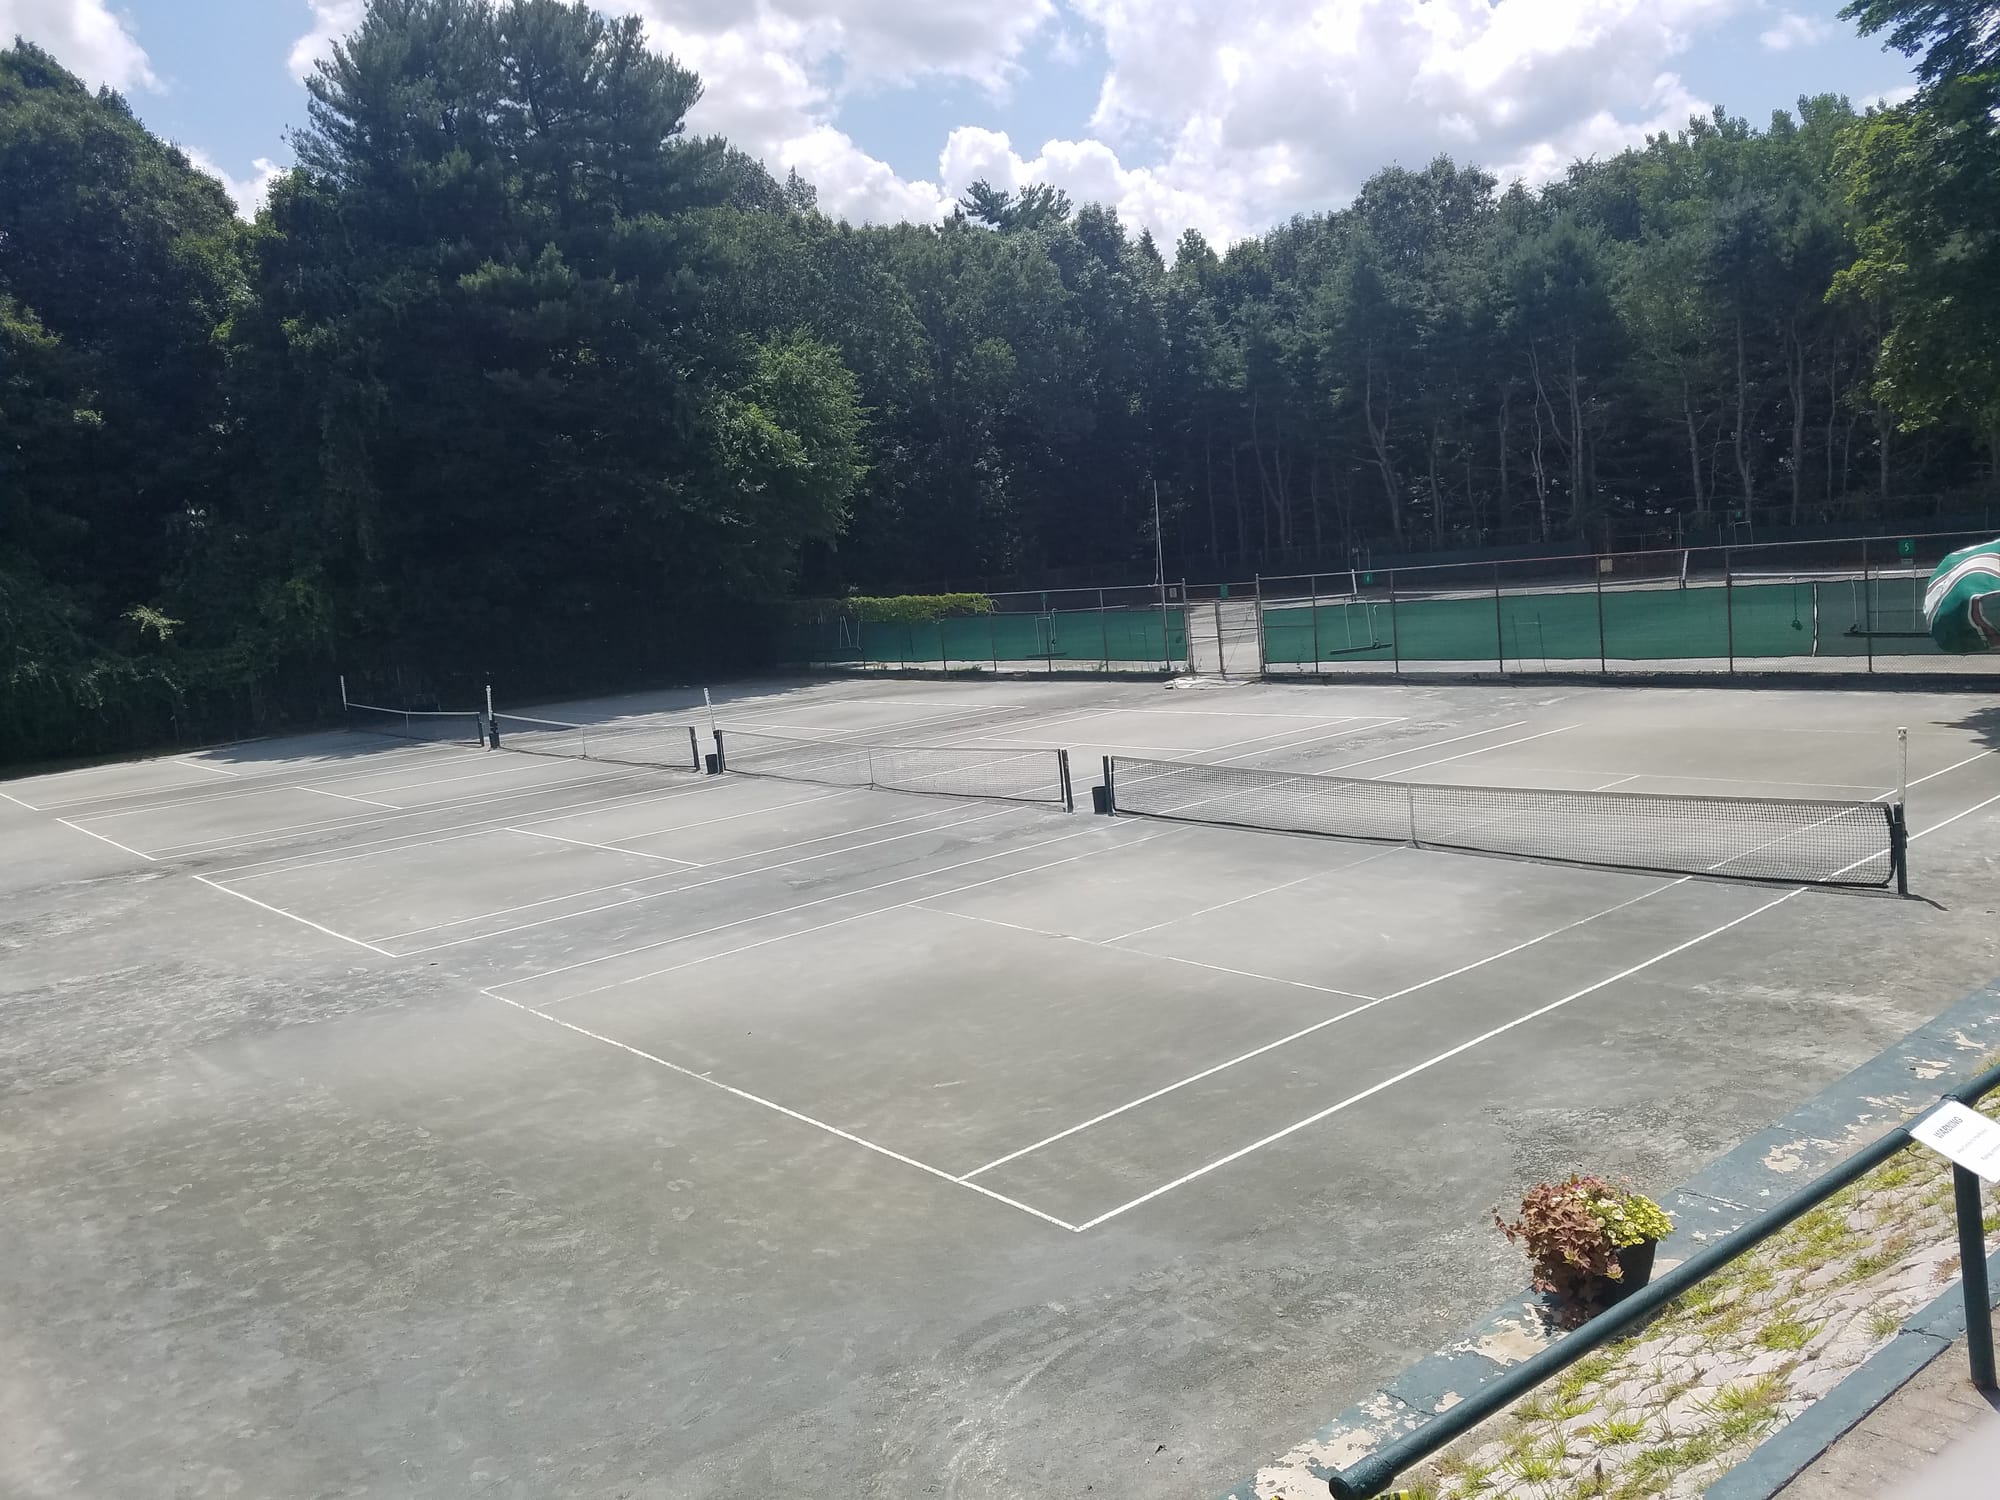 Rehab plan in the works for Winchester’s aging Packer-Ellis tennis courts